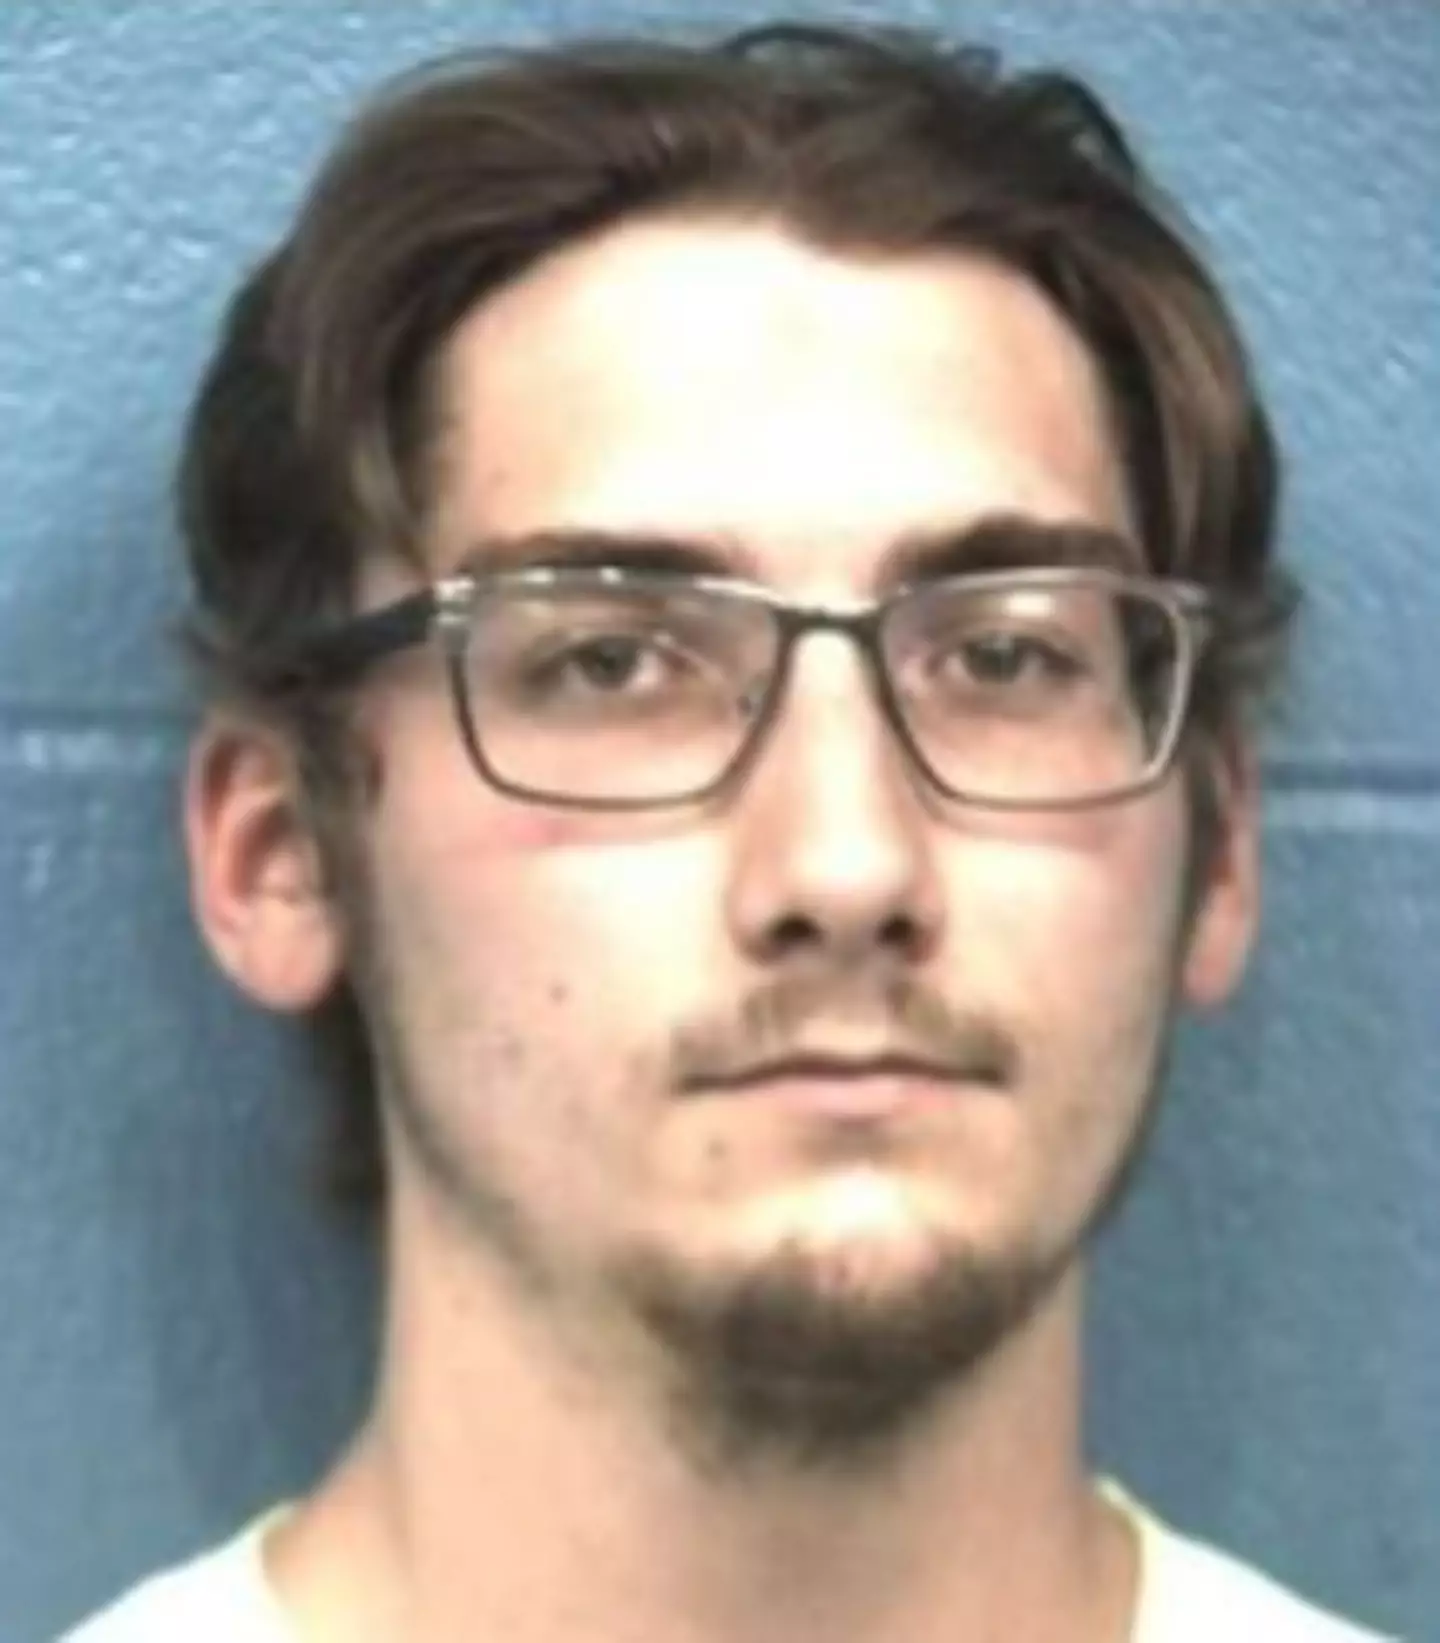 Christopher was accused of attacking his former girlfiend. (Temple Police Department)